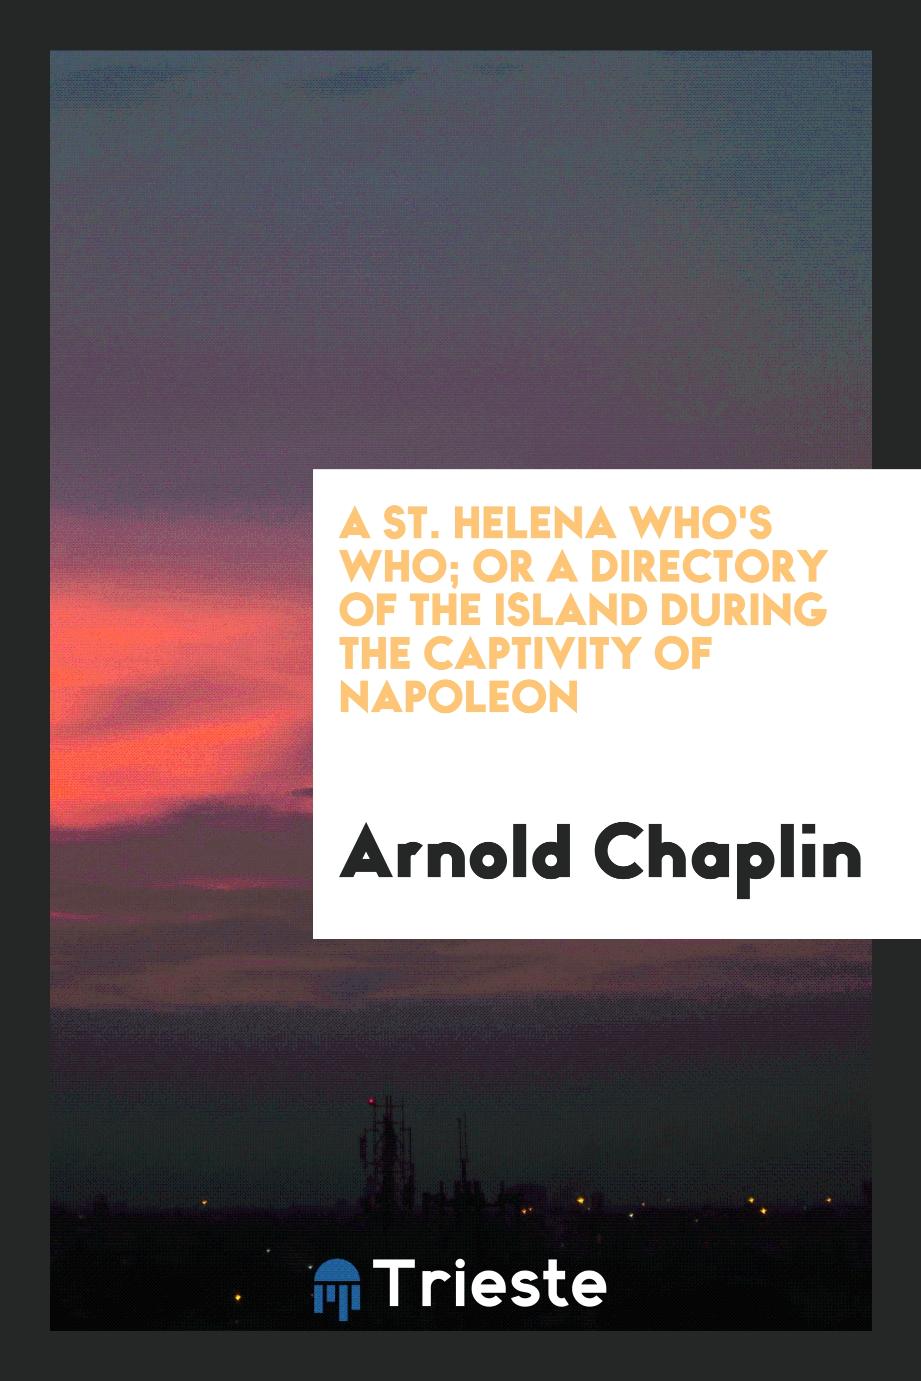 A St. Helena who's who; or a directory of the island during the captivity of Napoleon